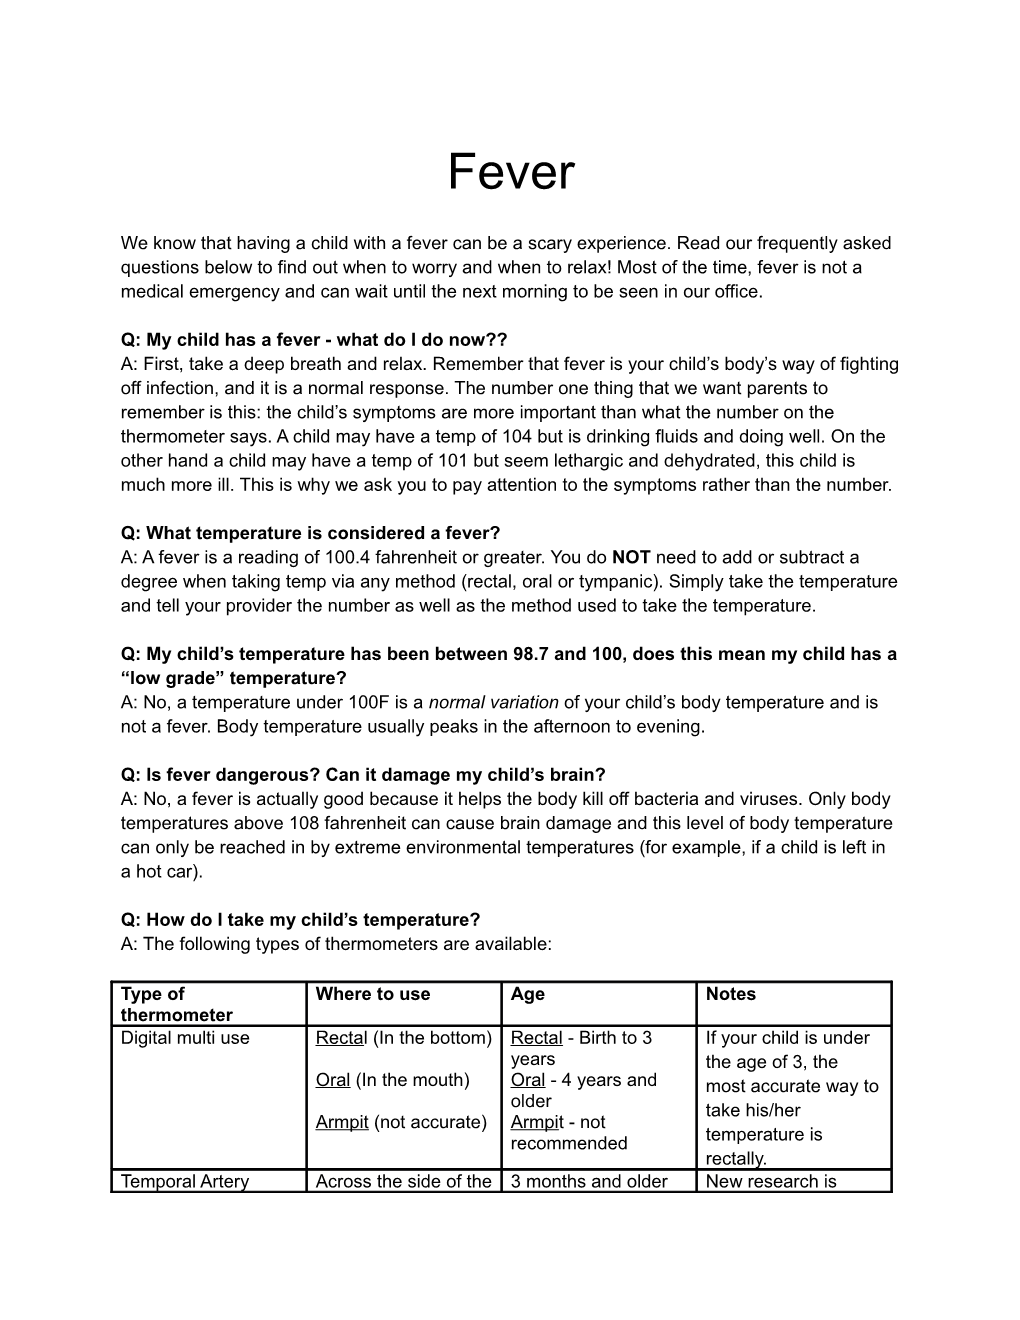 We Know That Having a Child with a Fever Can Be a Scary Experience